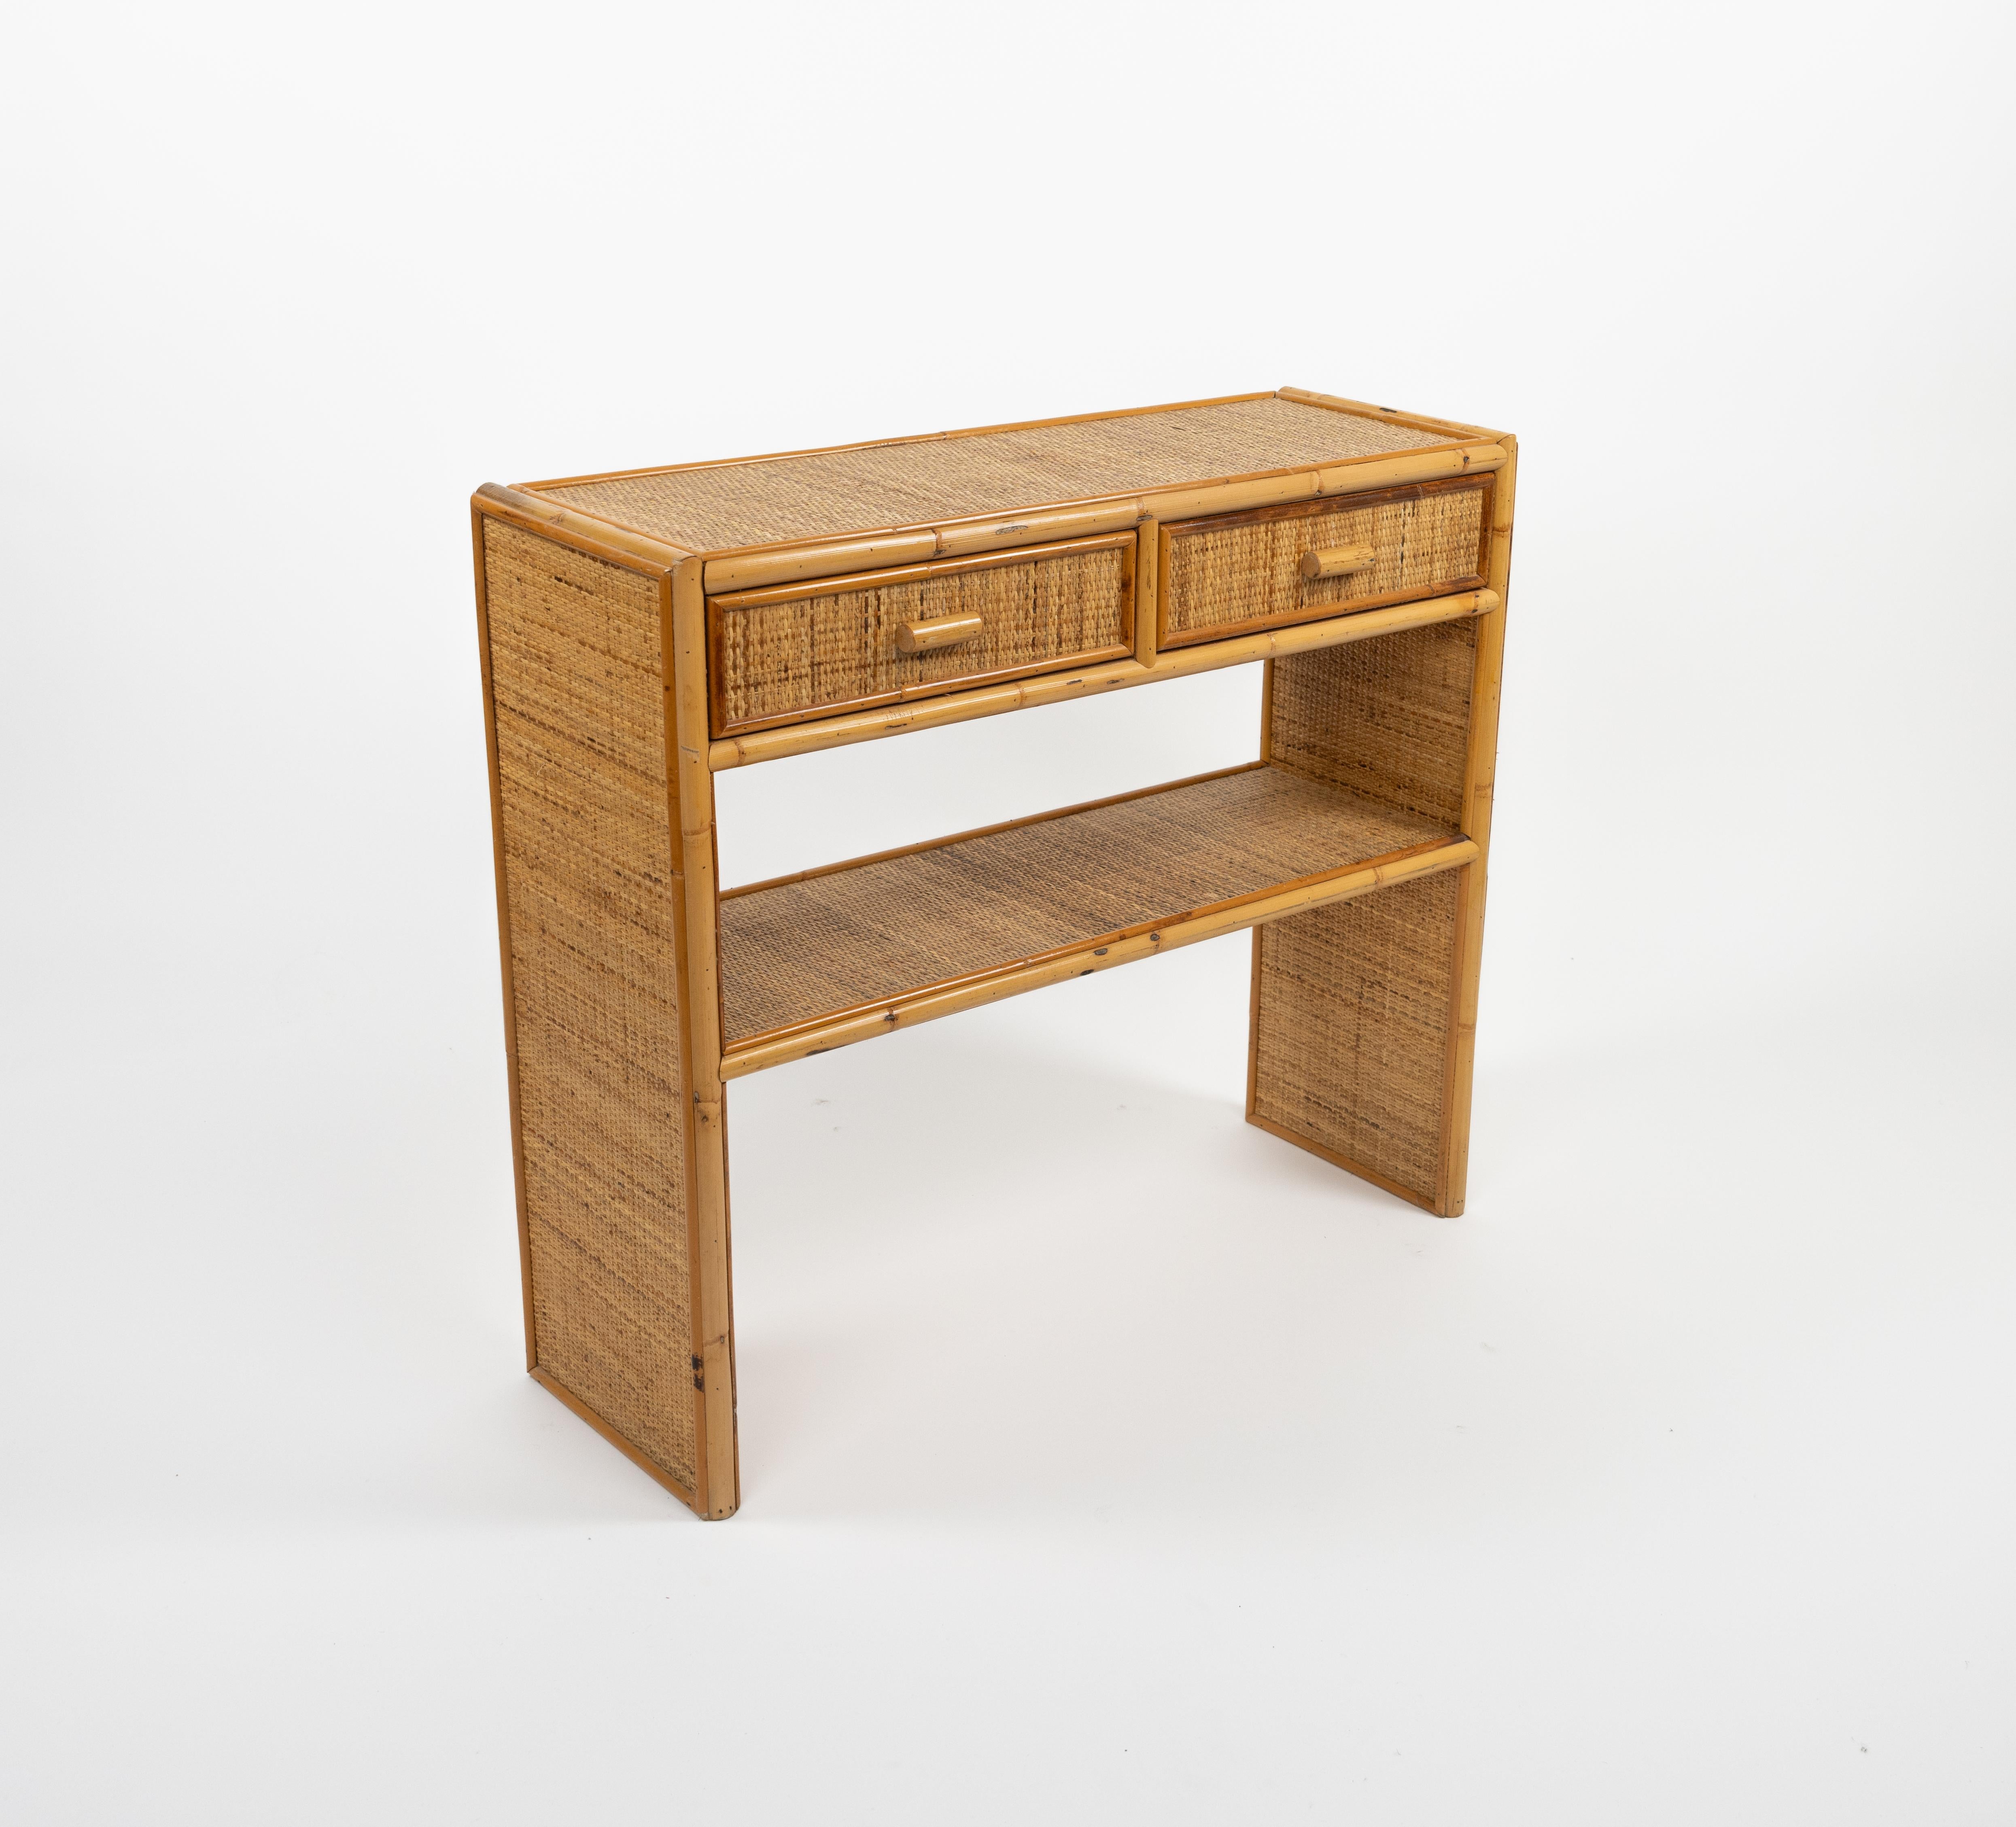 Midcentury beautiful console table in bamboo and rattan with 2 drawers in the style of Dal Vera.

Made in Italy in the 1970s.